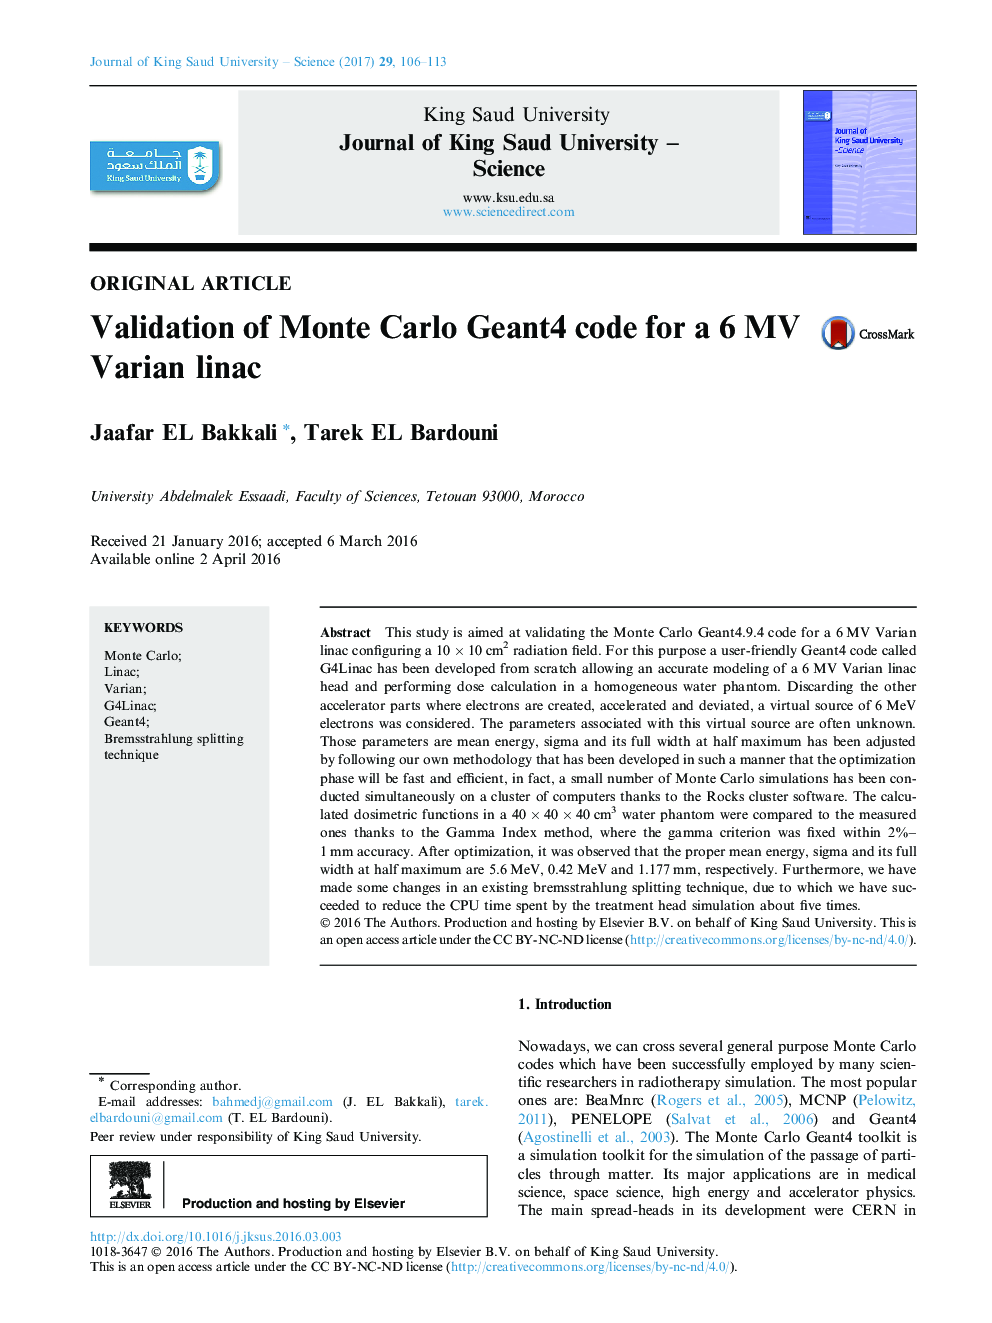 Validation of Monte Carlo Geant4 code for a 6 MV Varian linac